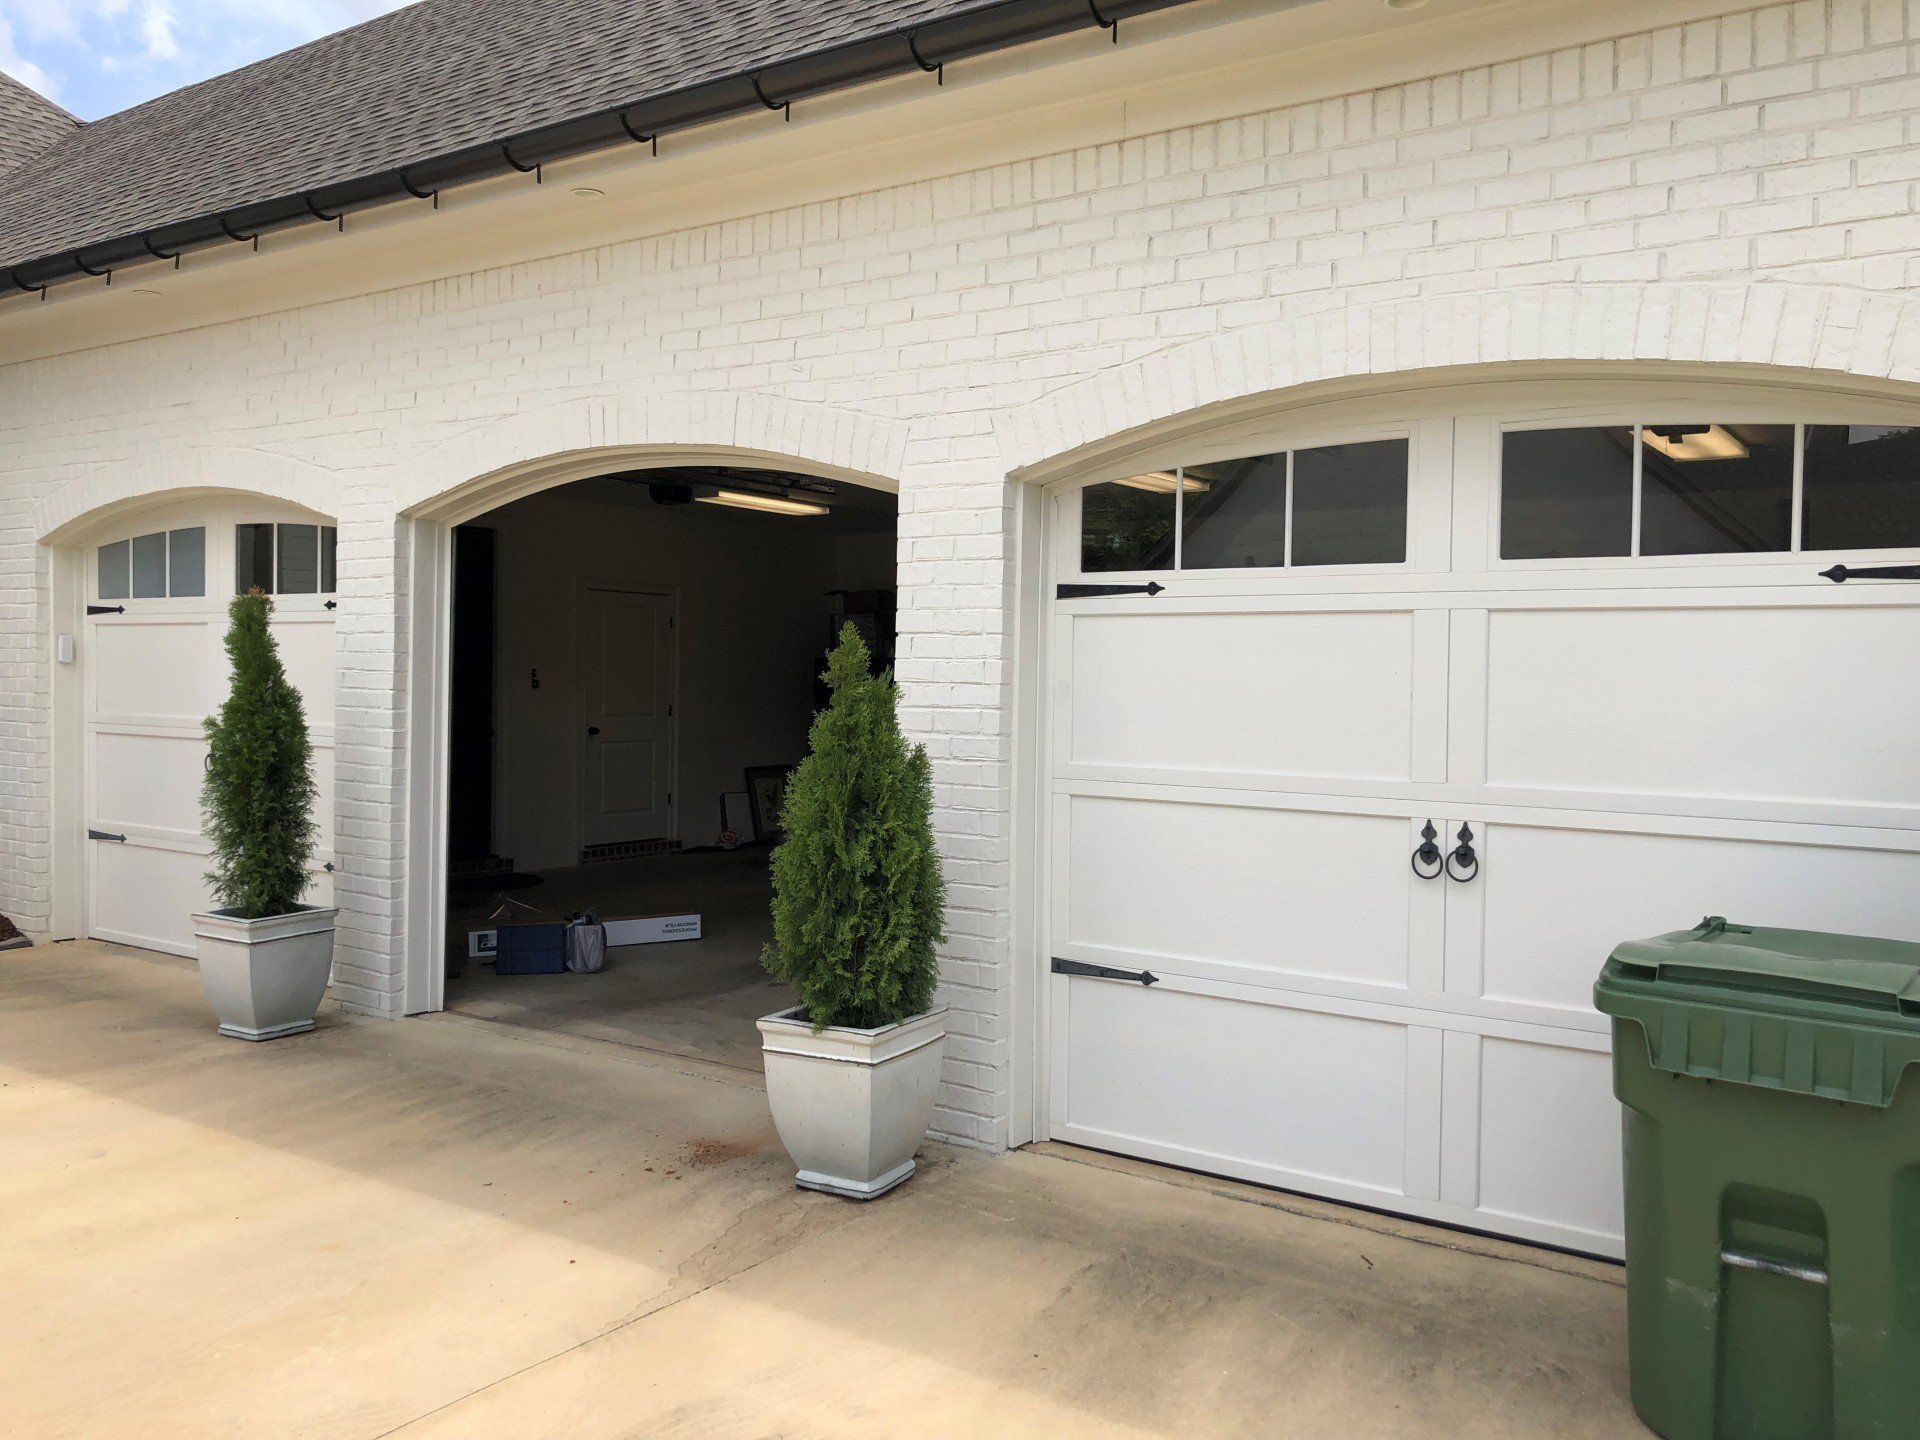 Home window tinting service in Prattville - Privacy tint was needed for these residential garage windows in Prattville AL-2019